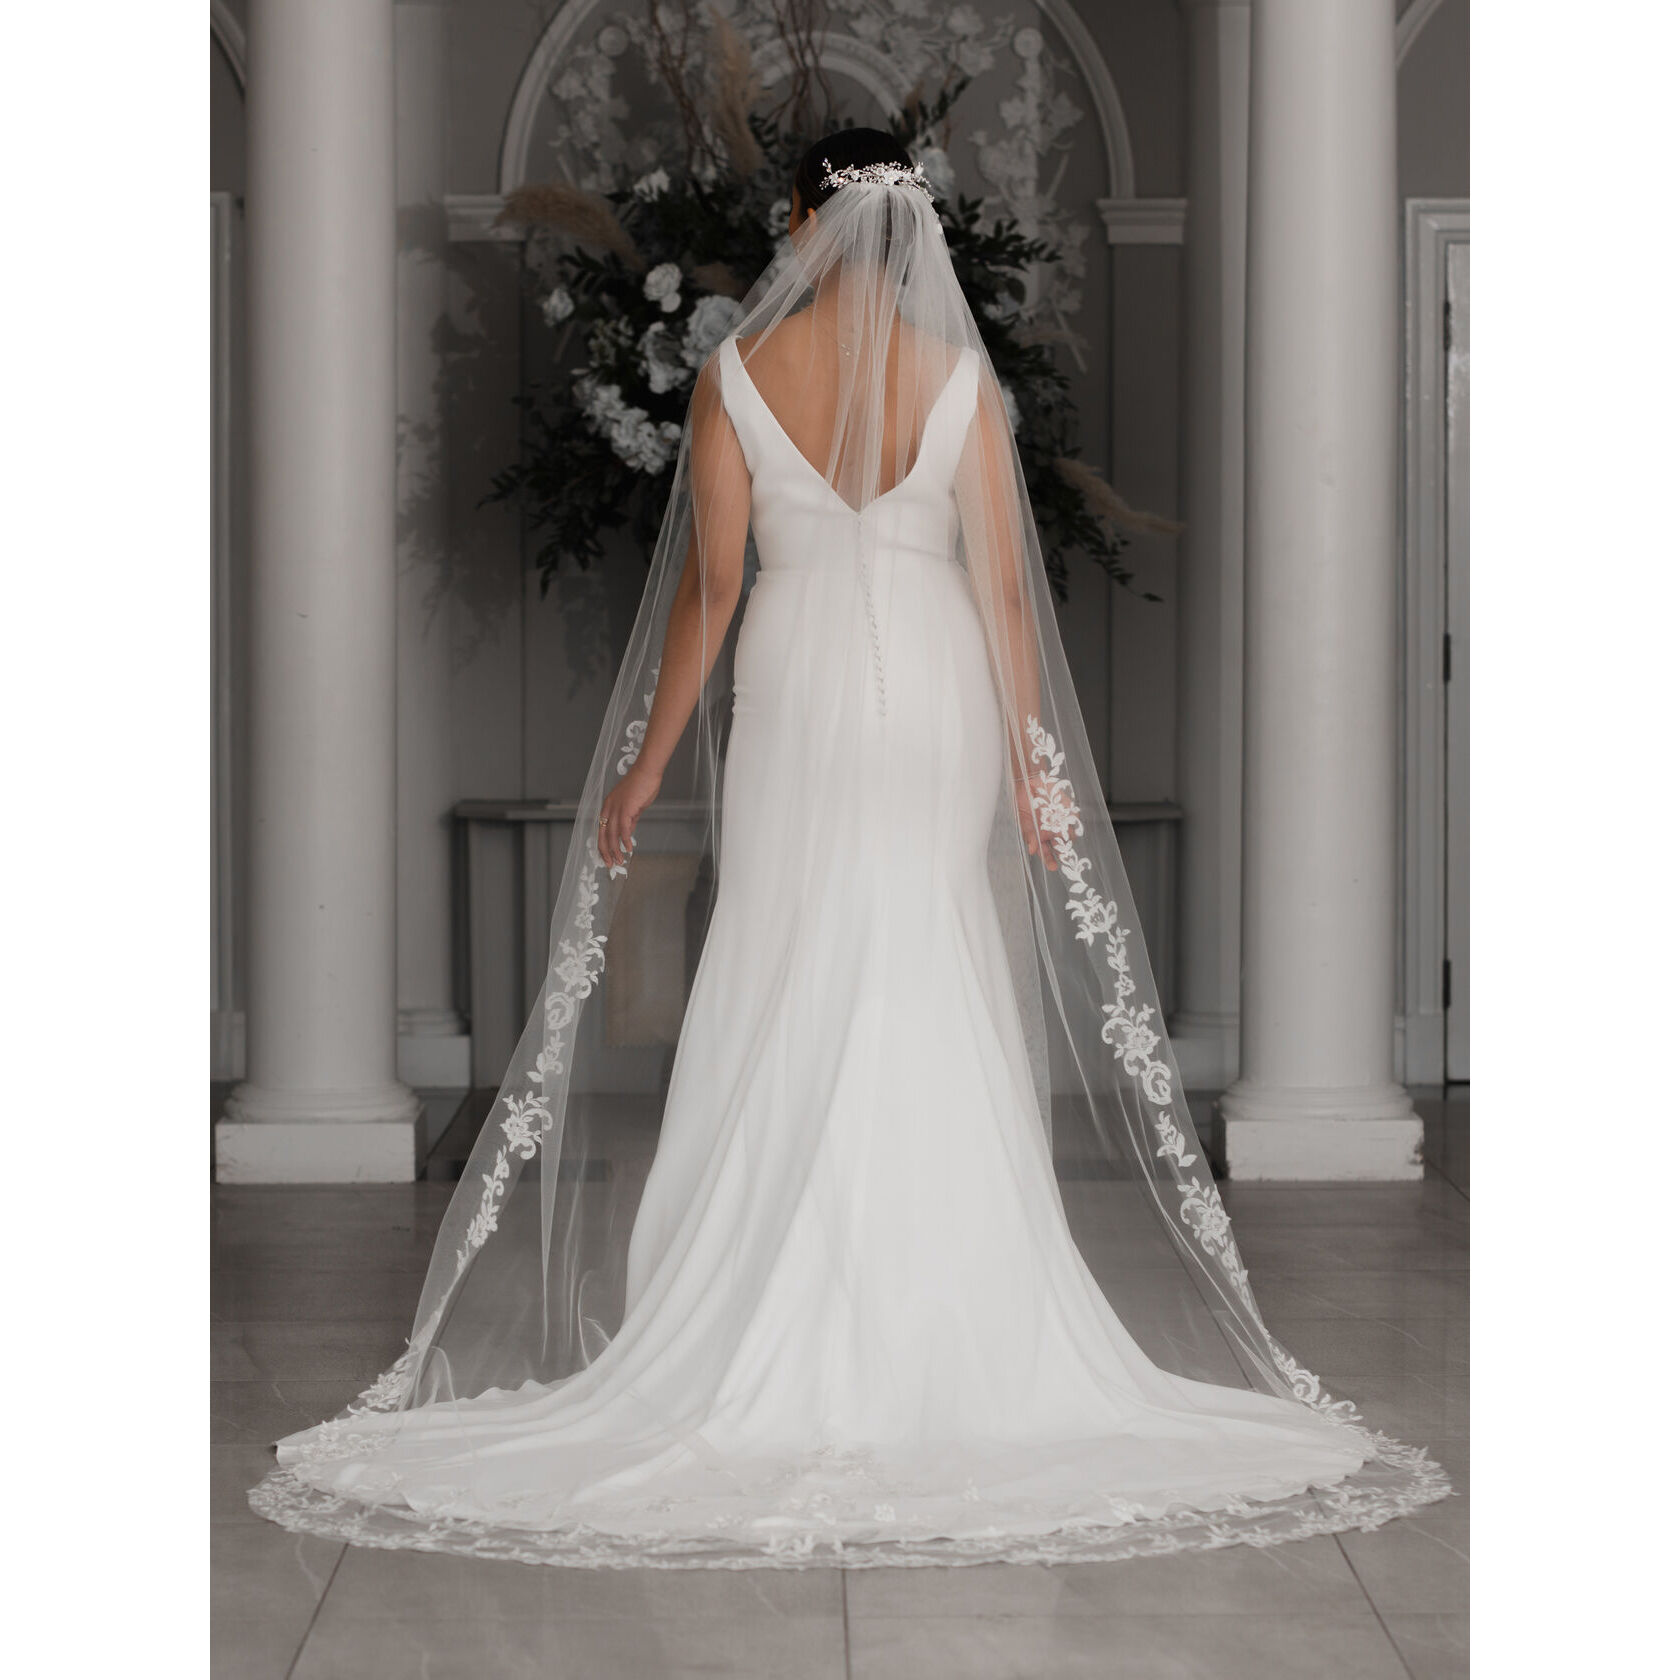 Single tier long ivory tulle veil with a beaded lace edge